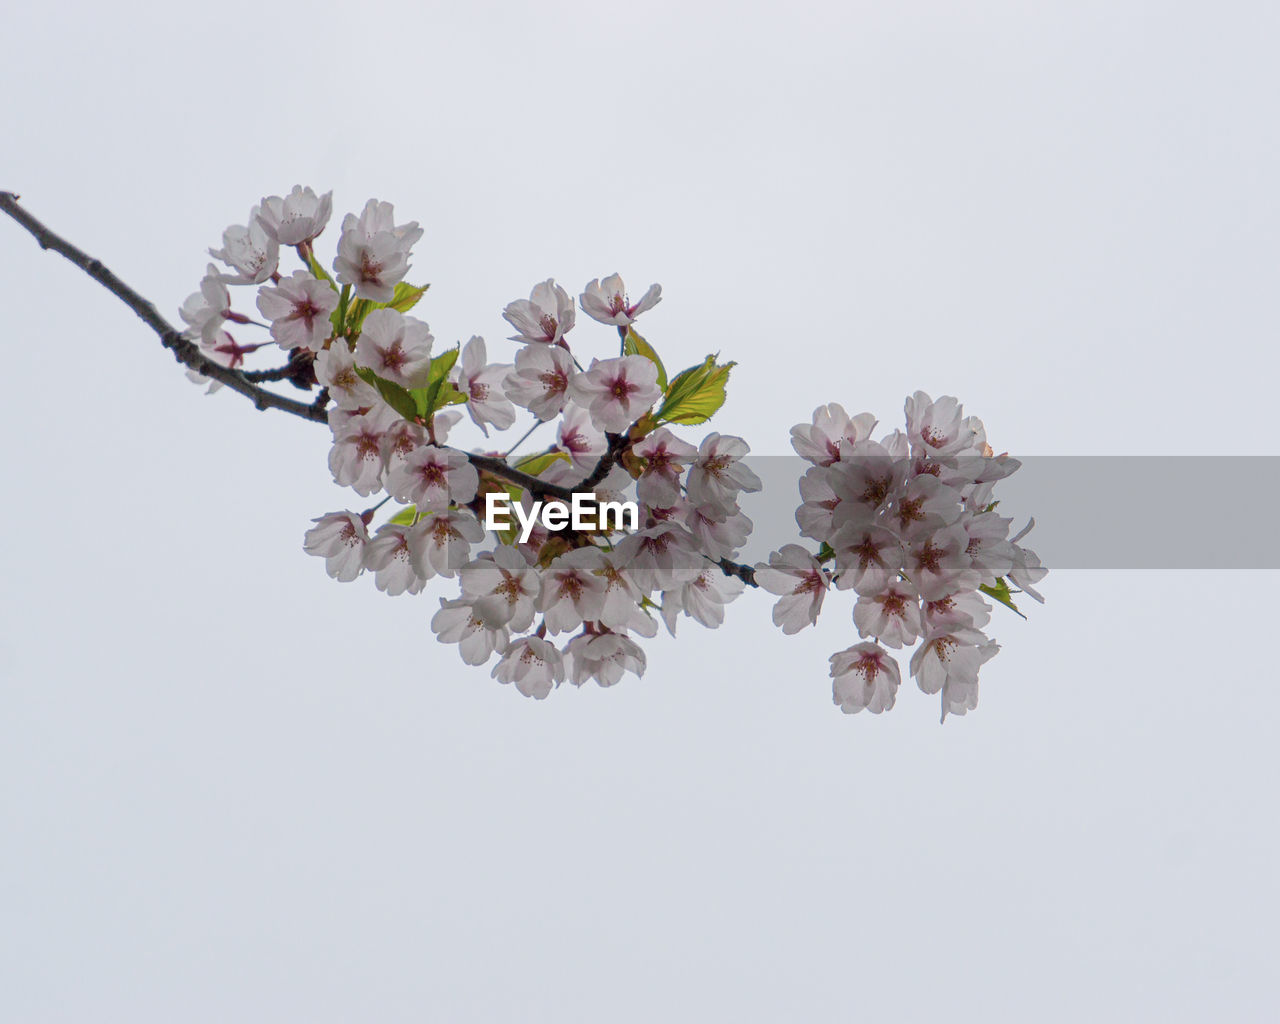 CLOSE-UP OF PINK CHERRY BLOSSOM AGAINST WHITE BACKGROUND